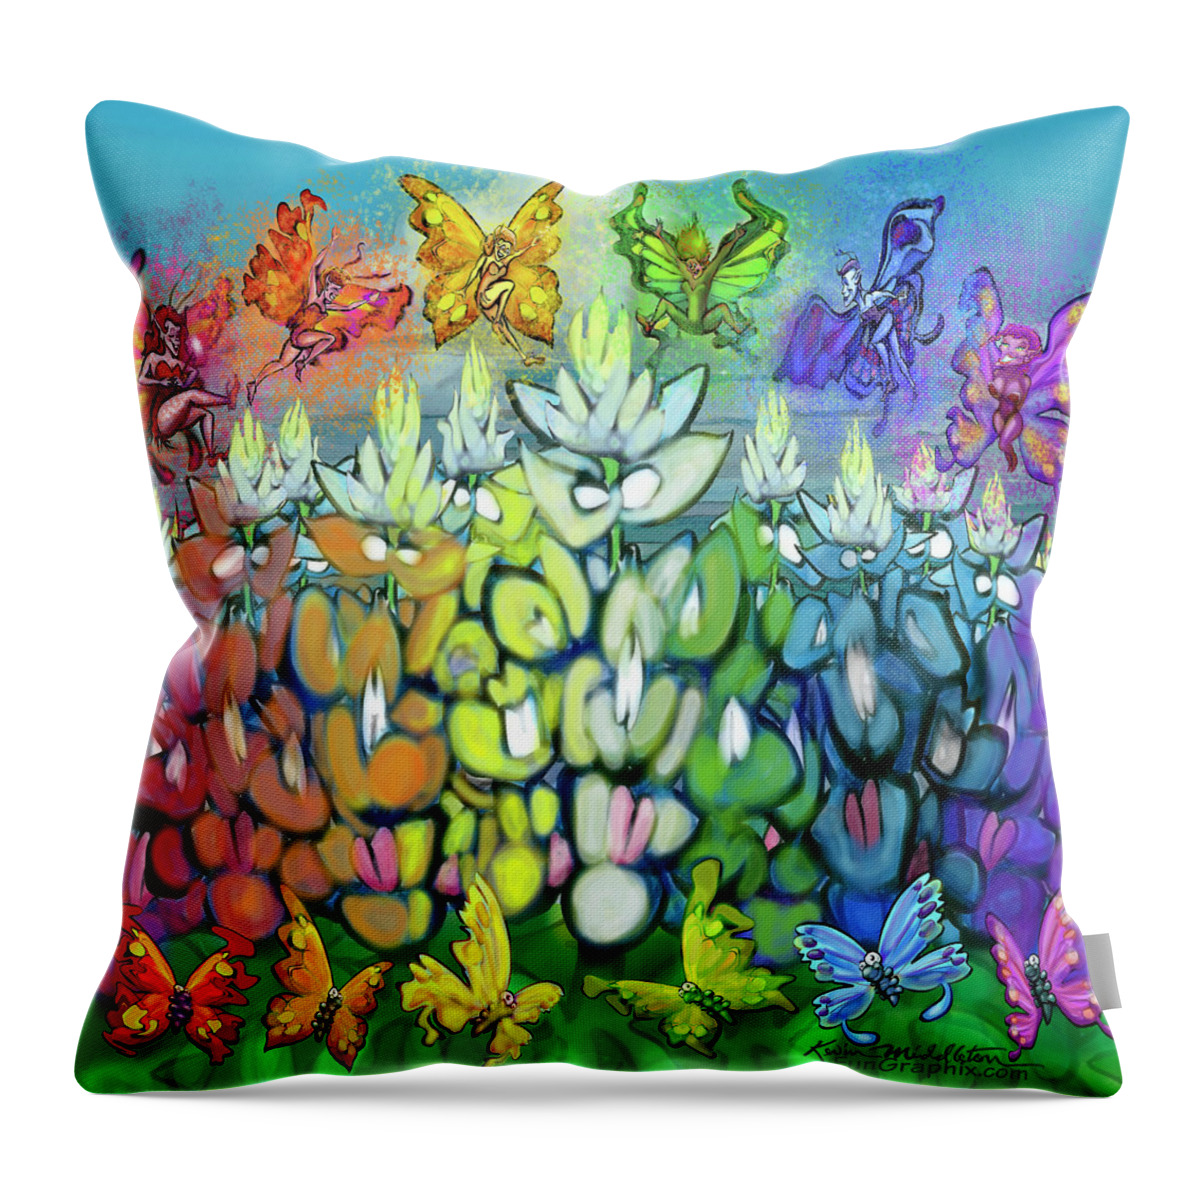 Rainbow Throw Pillow featuring the digital art Rainbow Bluebonnets Scene w Pixies by Kevin Middleton